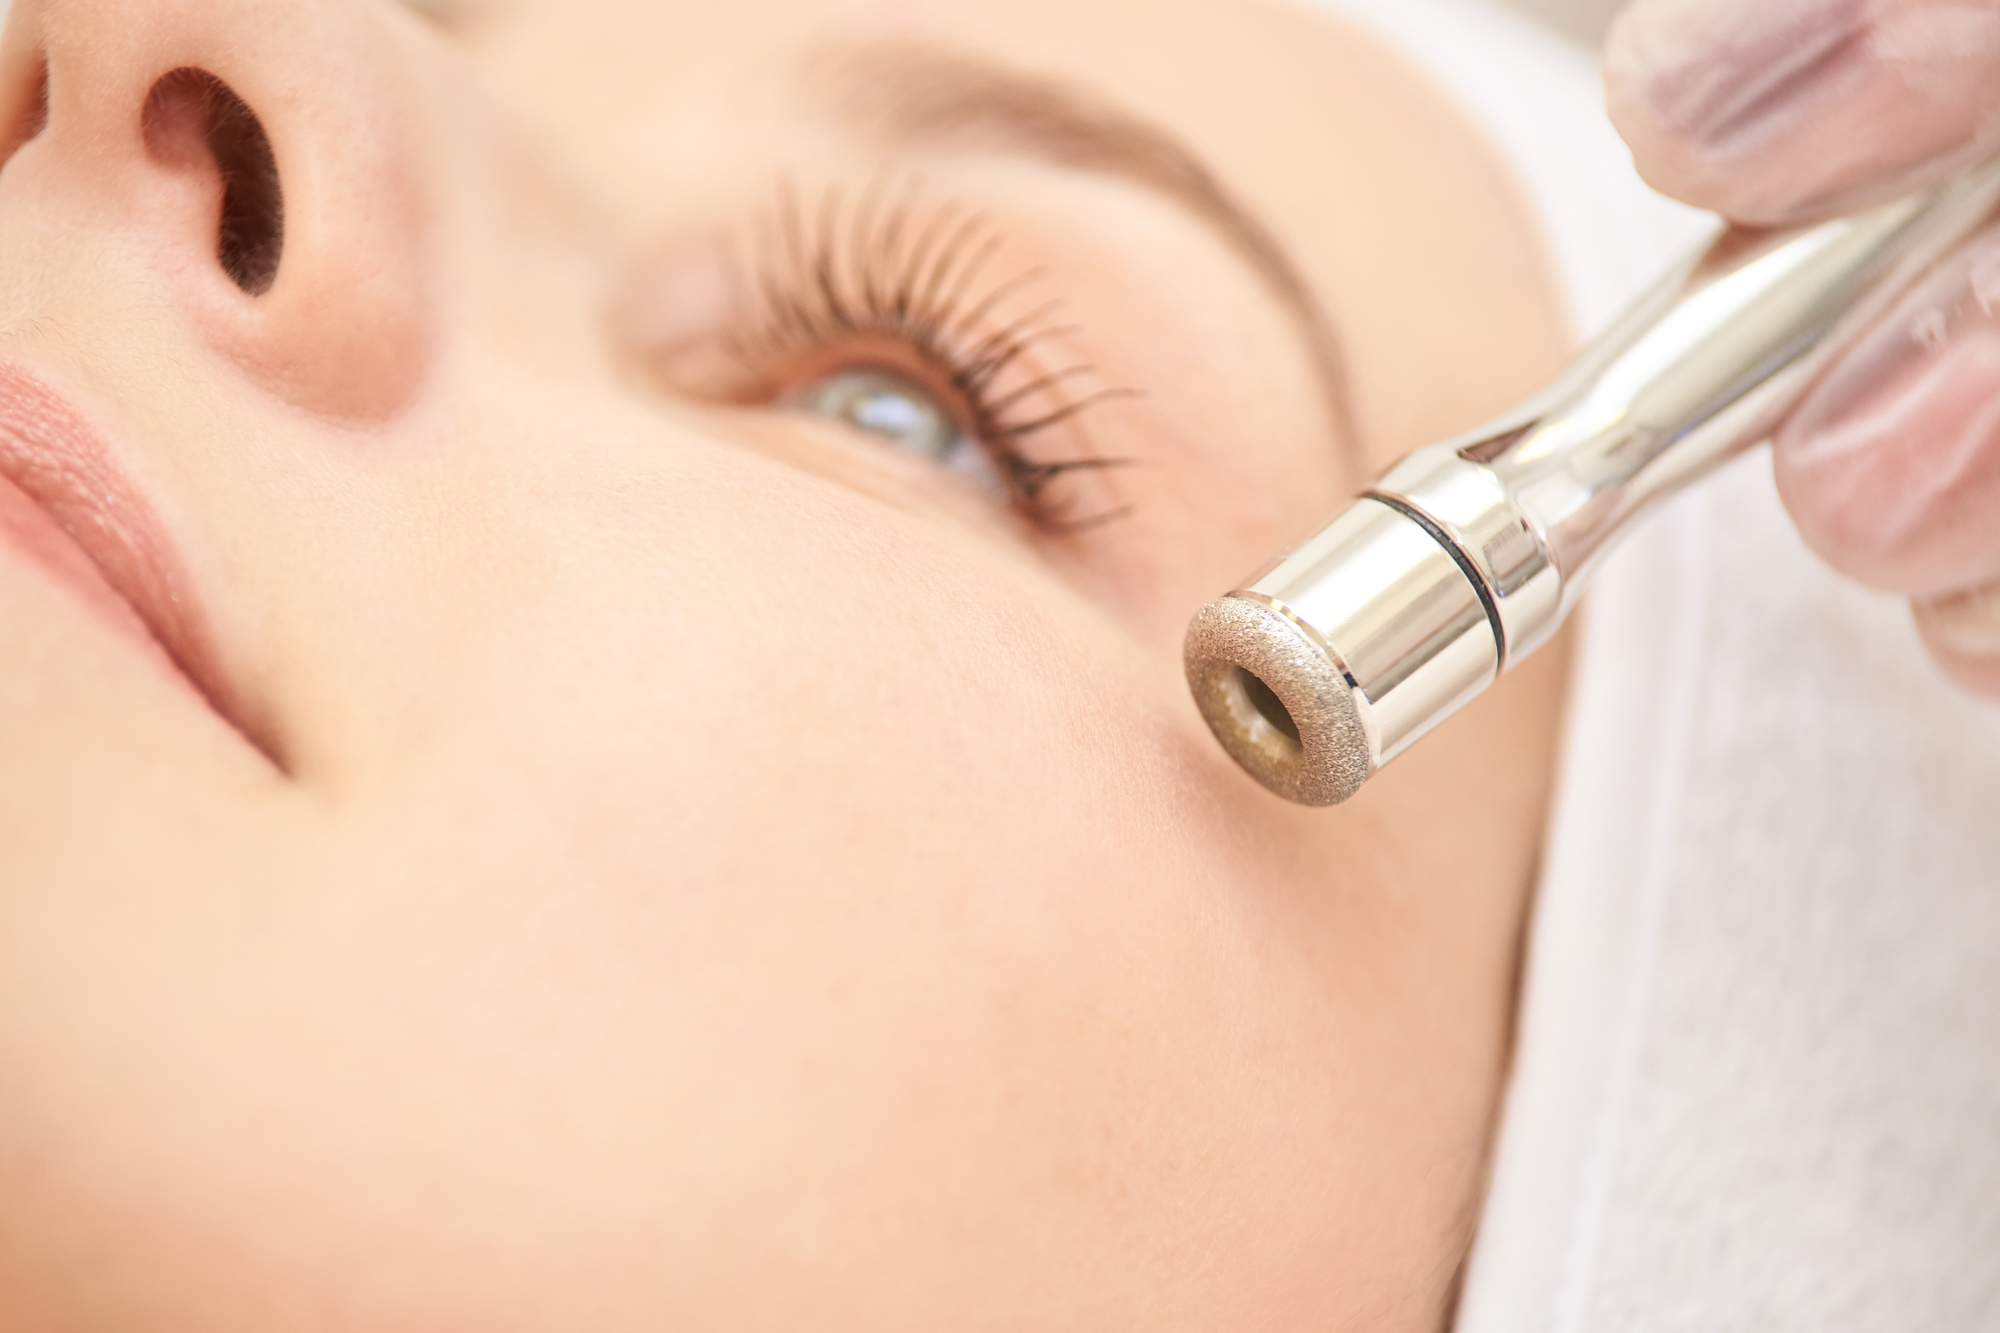 Microdermabrasion clinic treatment